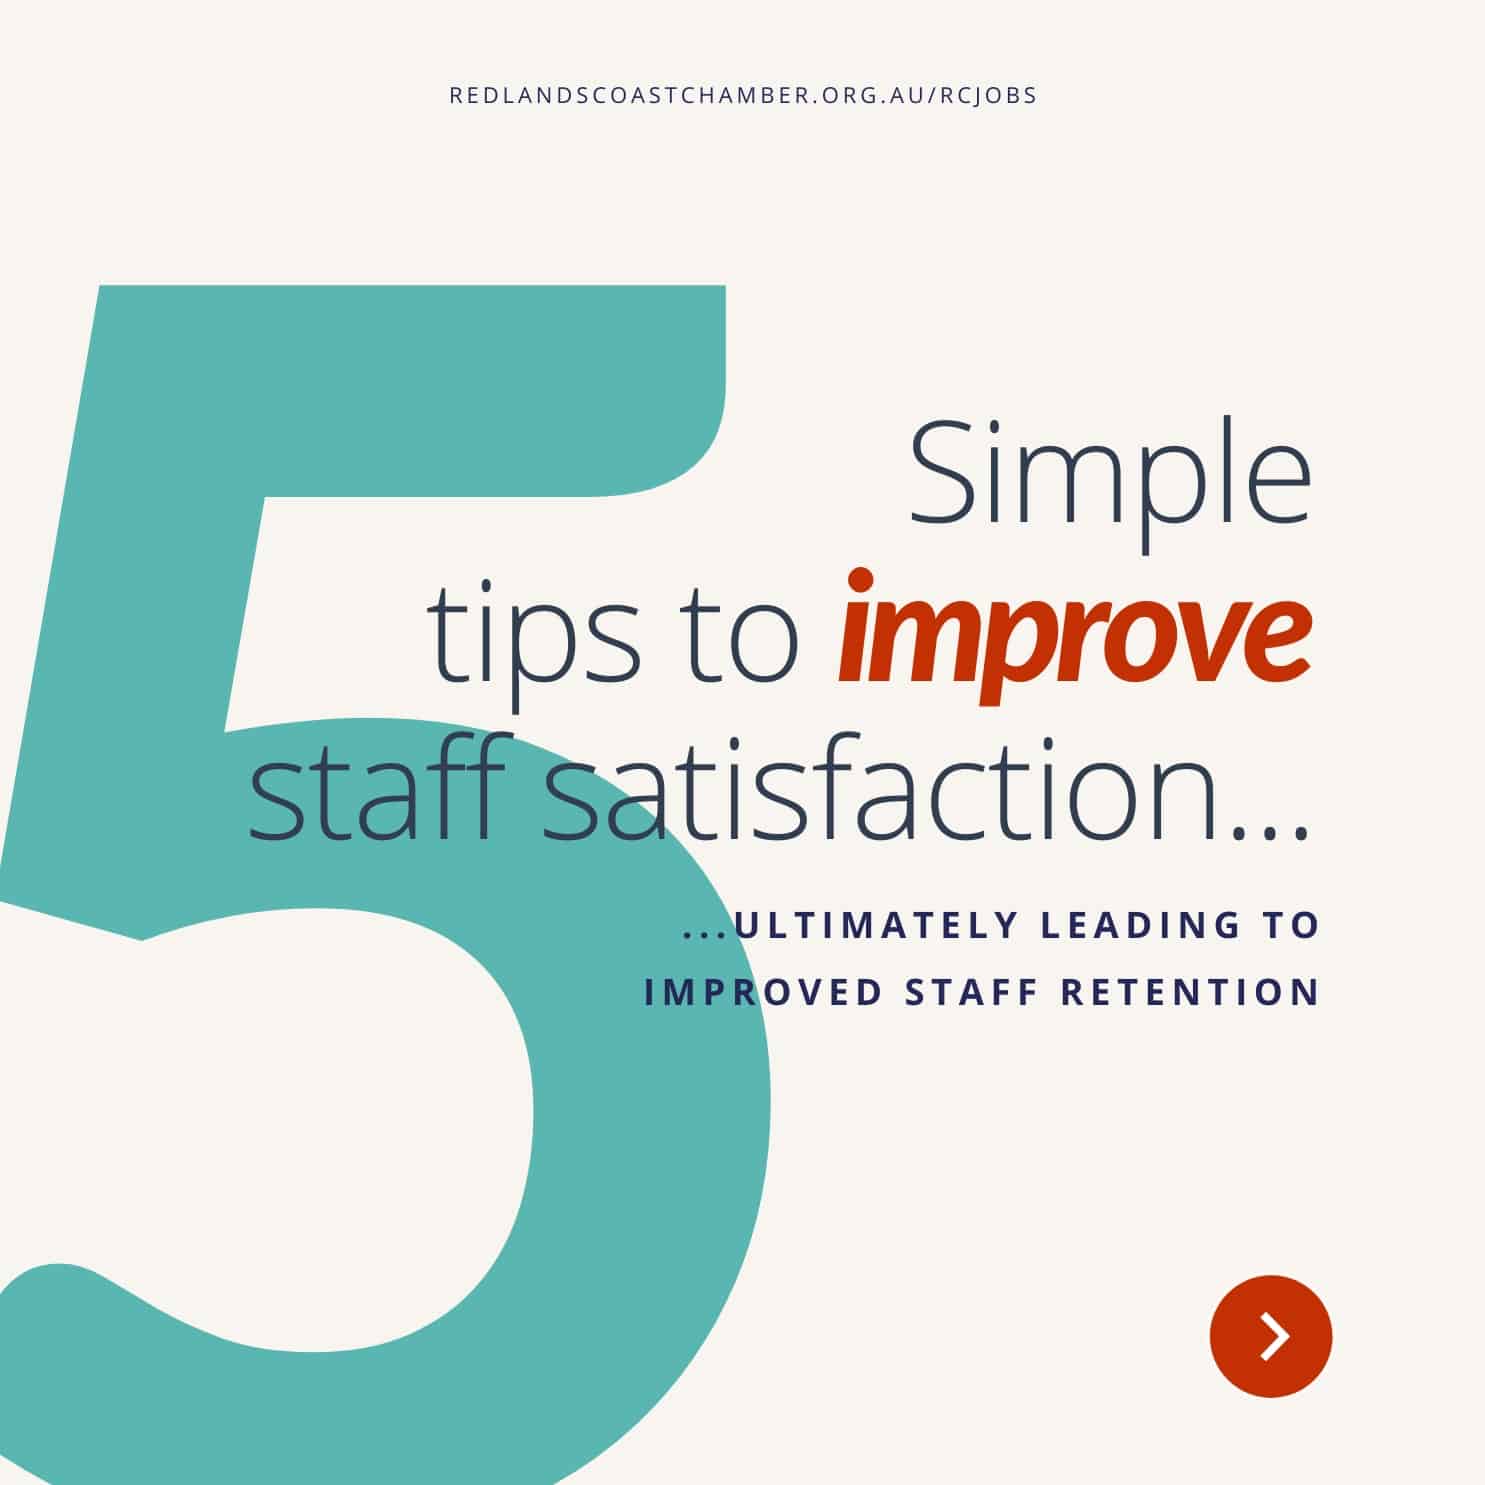 5 Simple tips to improve staff satisfaction